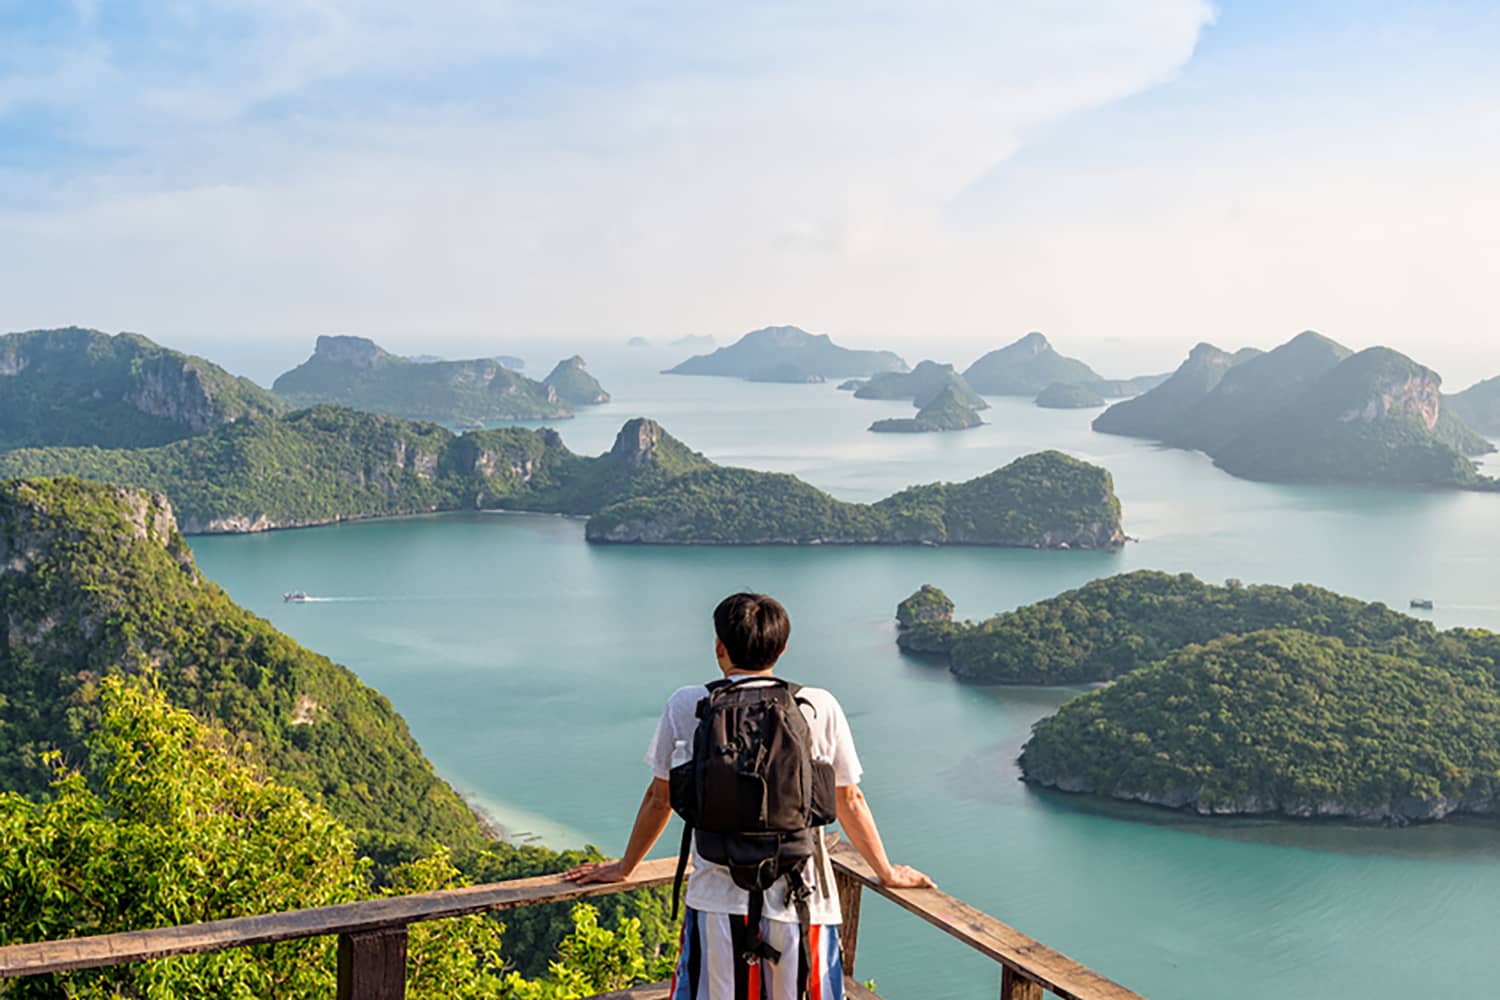 Thailand Just Announced a Major Change for Travelers